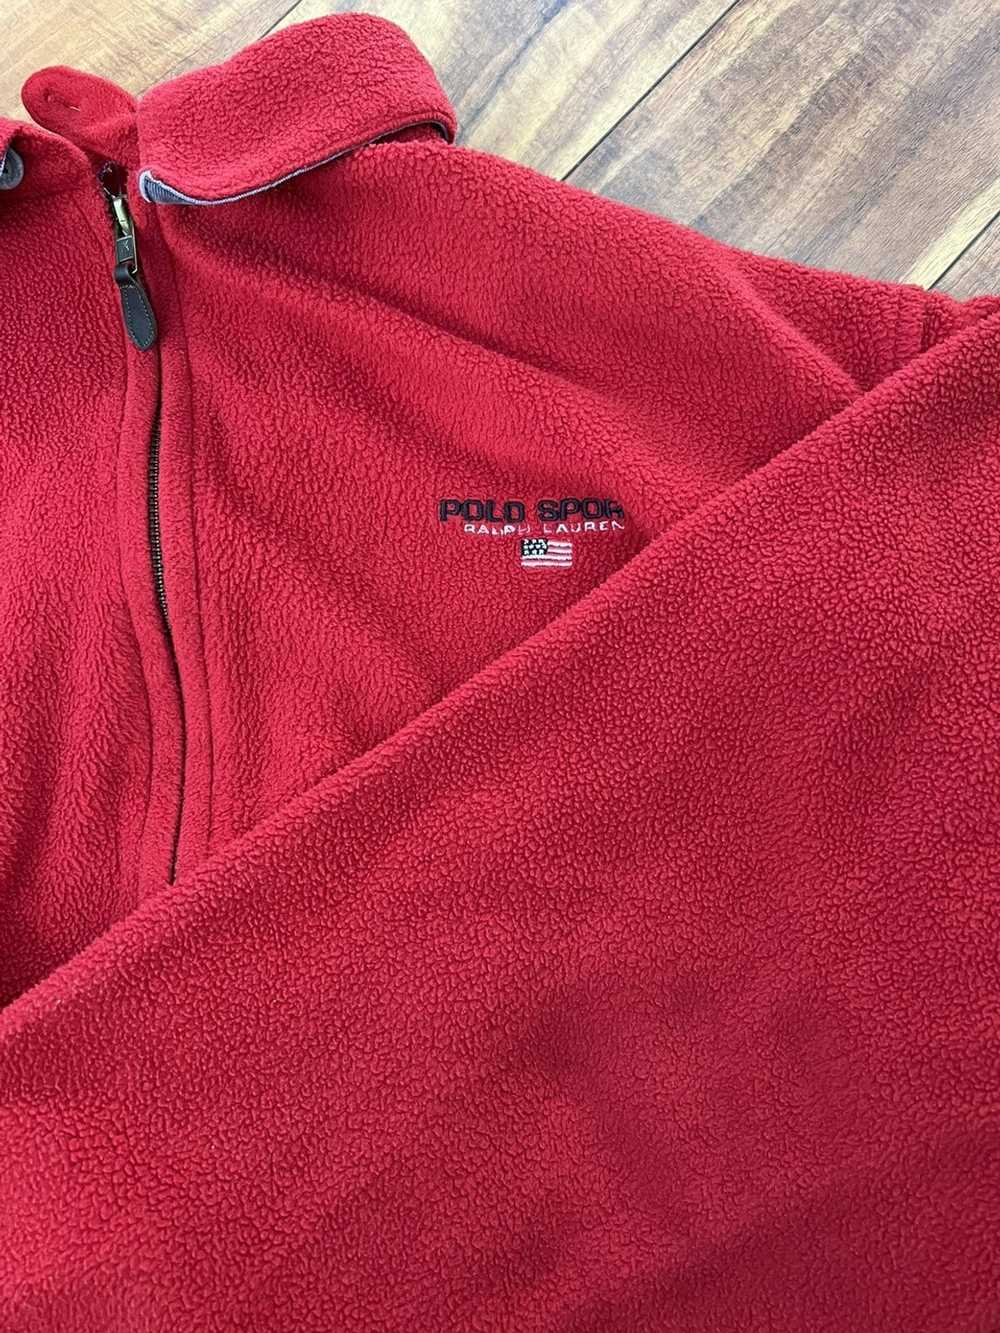 Polo Ralph Lauren Vintage PoloSports red jackets - image 3